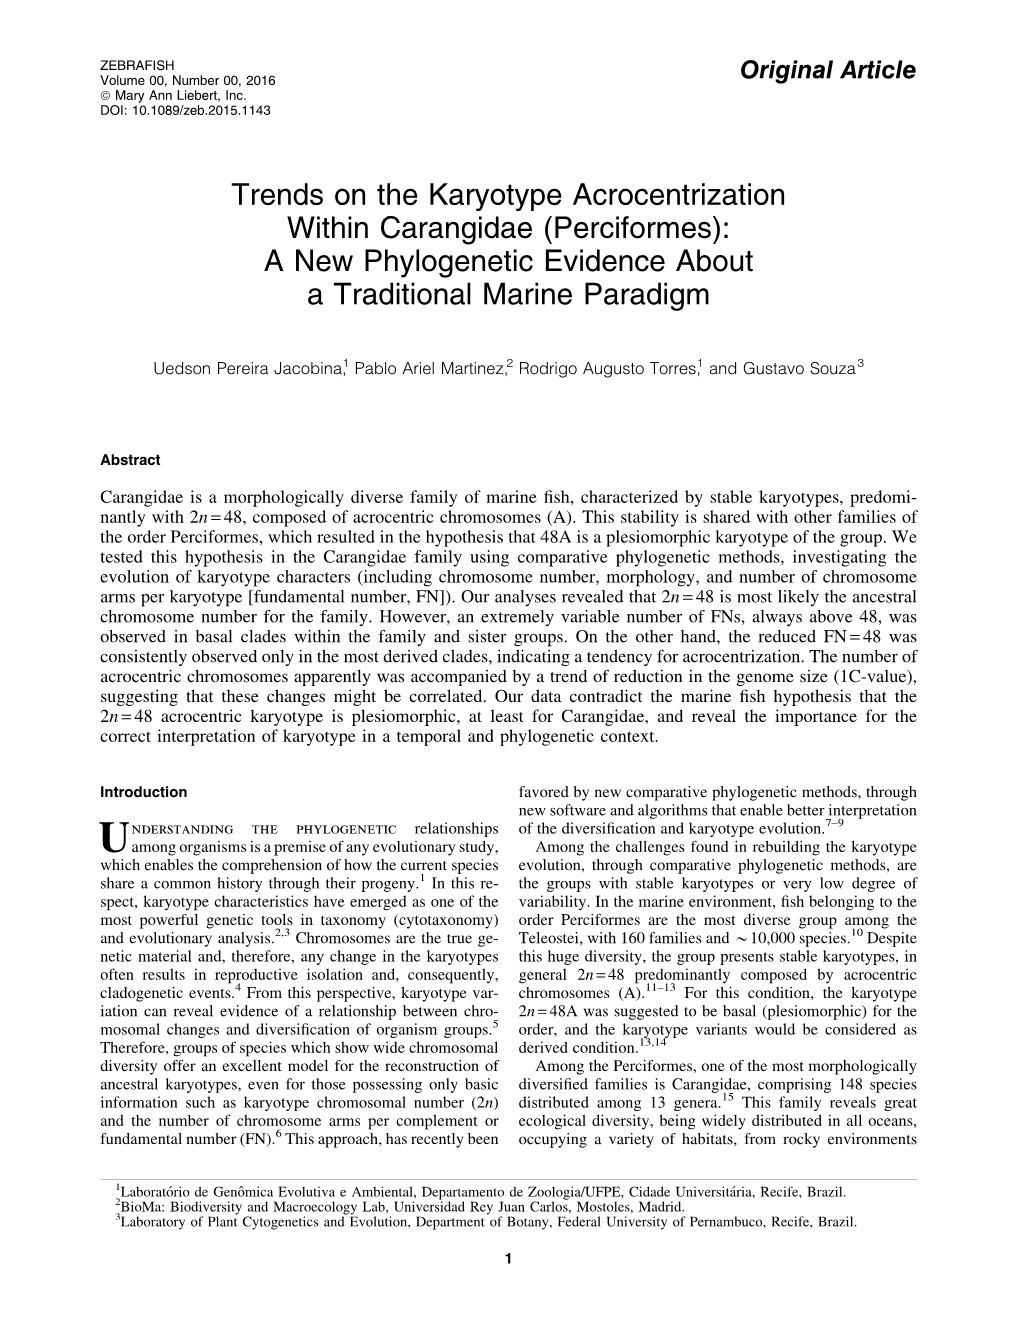 Trends on the Karyotype Acrocentrization Within Carangidae (Perciformes): a New Phylogenetic Evidence About a Traditional Marine Paradigm